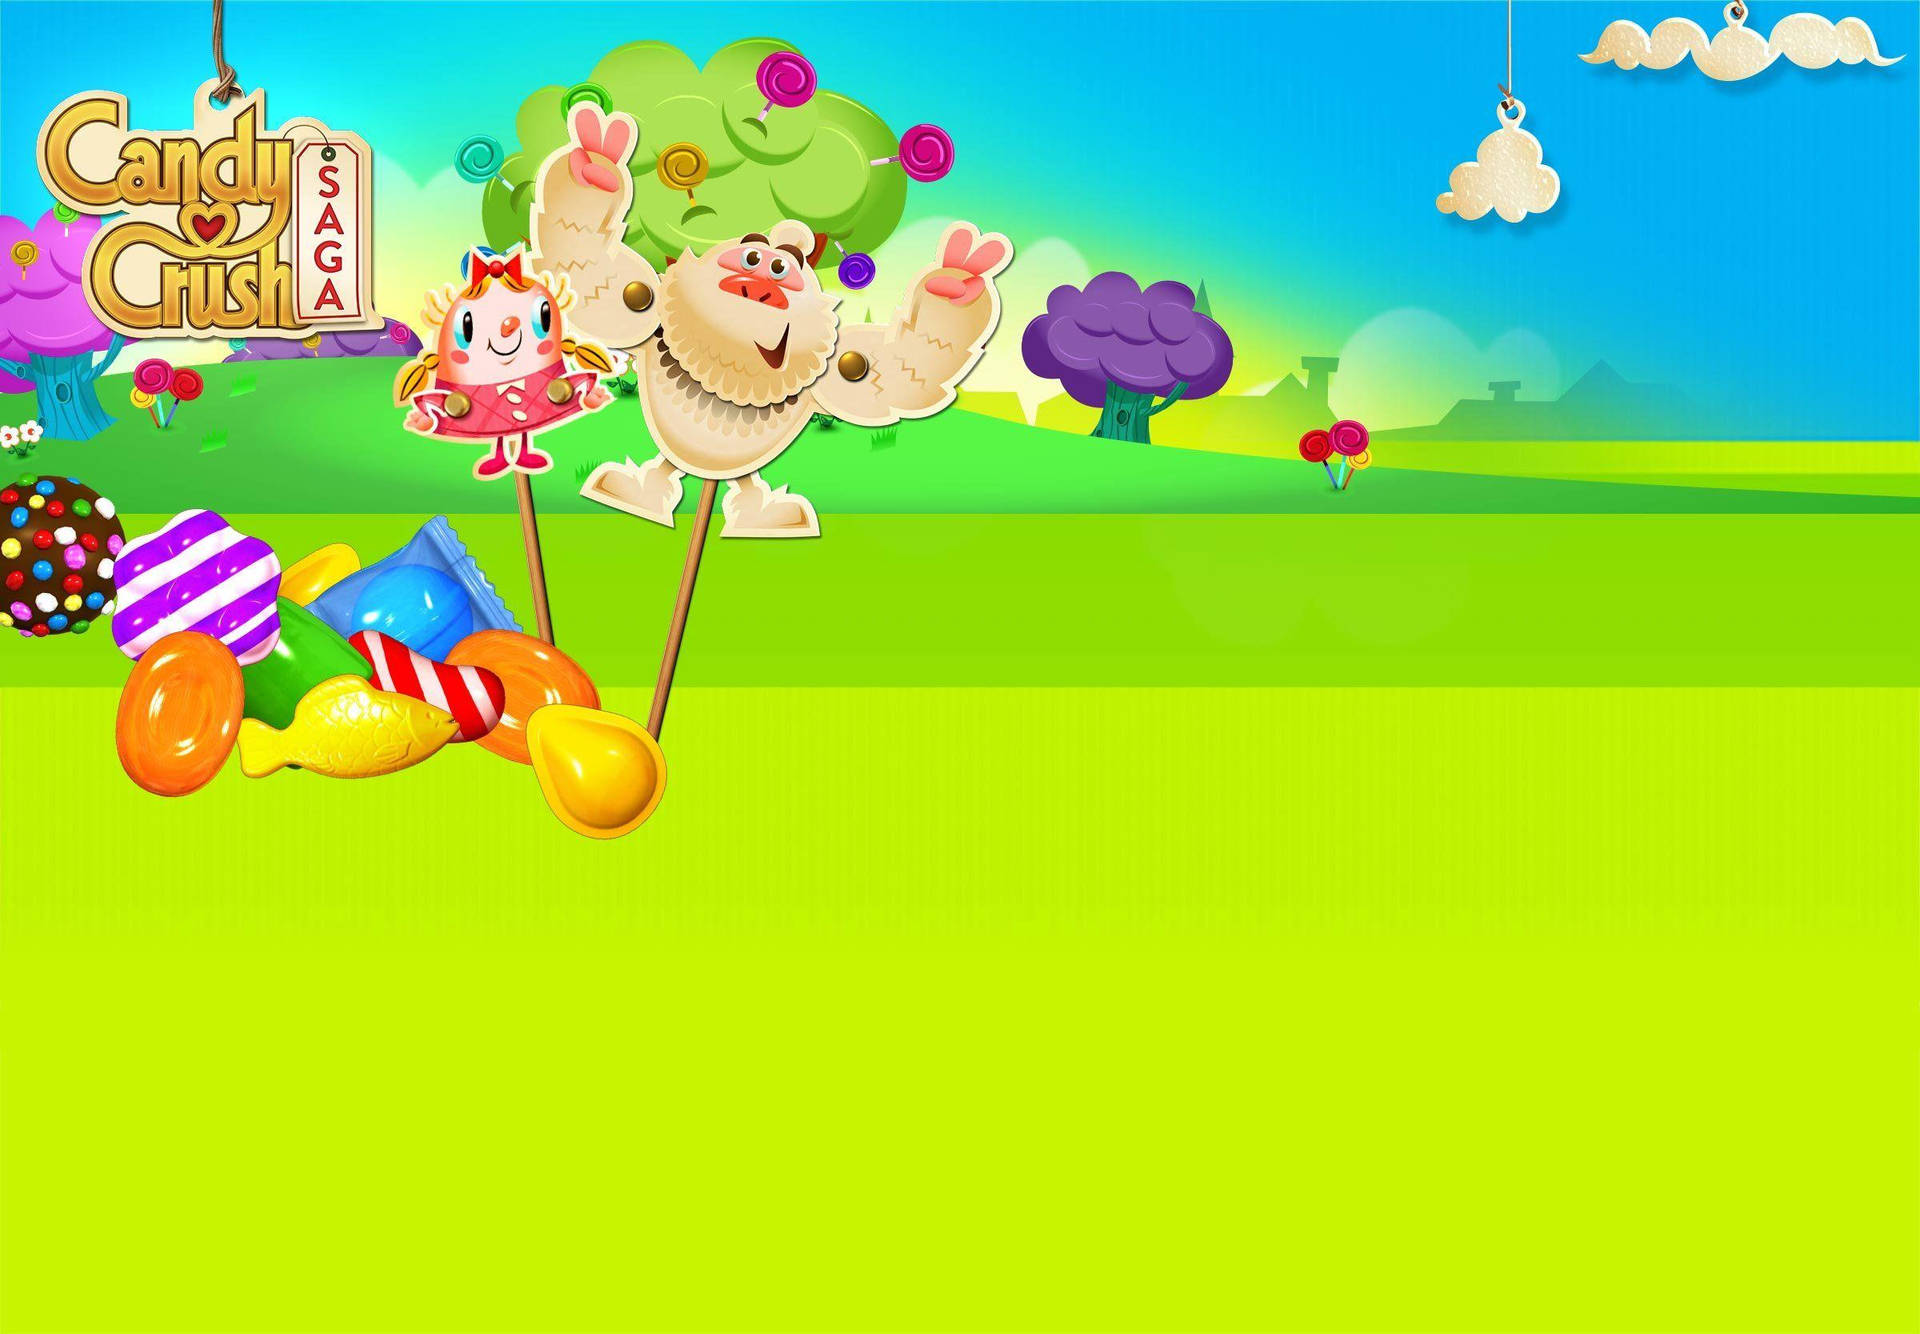 Exciting Adventures with Tiffi and Mr. Yeti in Candy Crush Saga Wallpaper